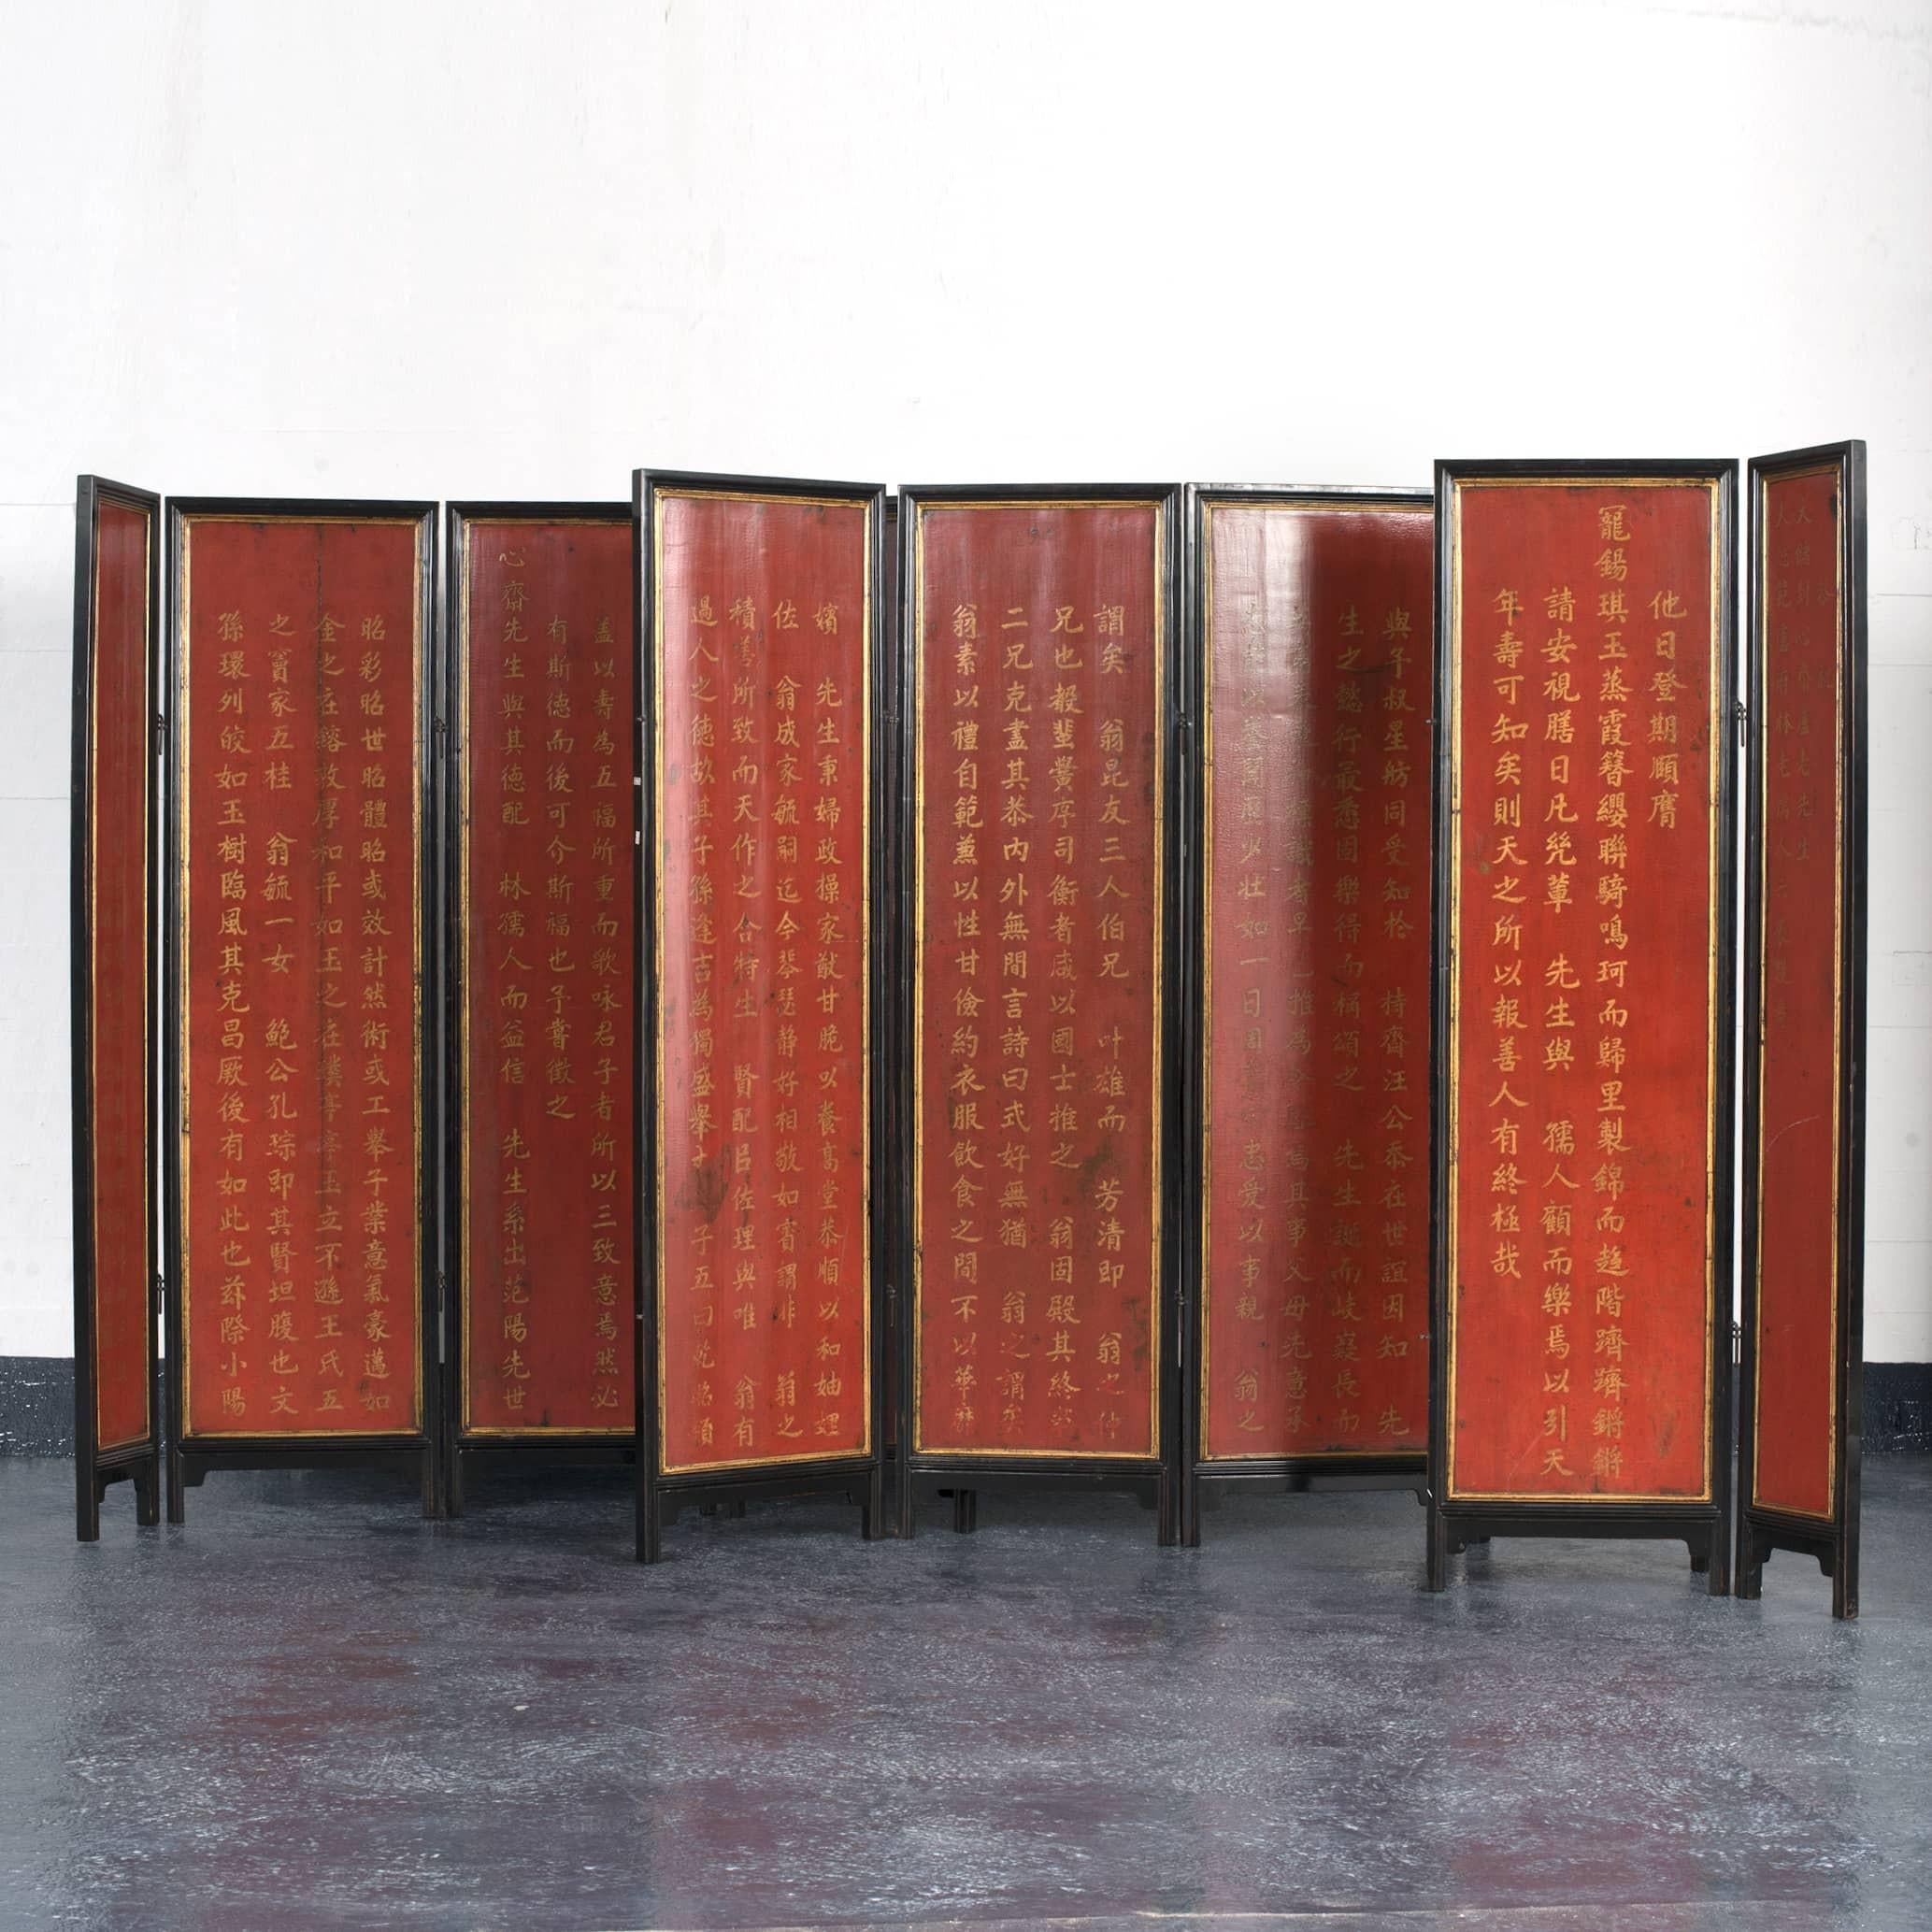 10 Lacquer Calligraphy Panels, Later Mounted as a Screen, Late 18th Century For Sale 3